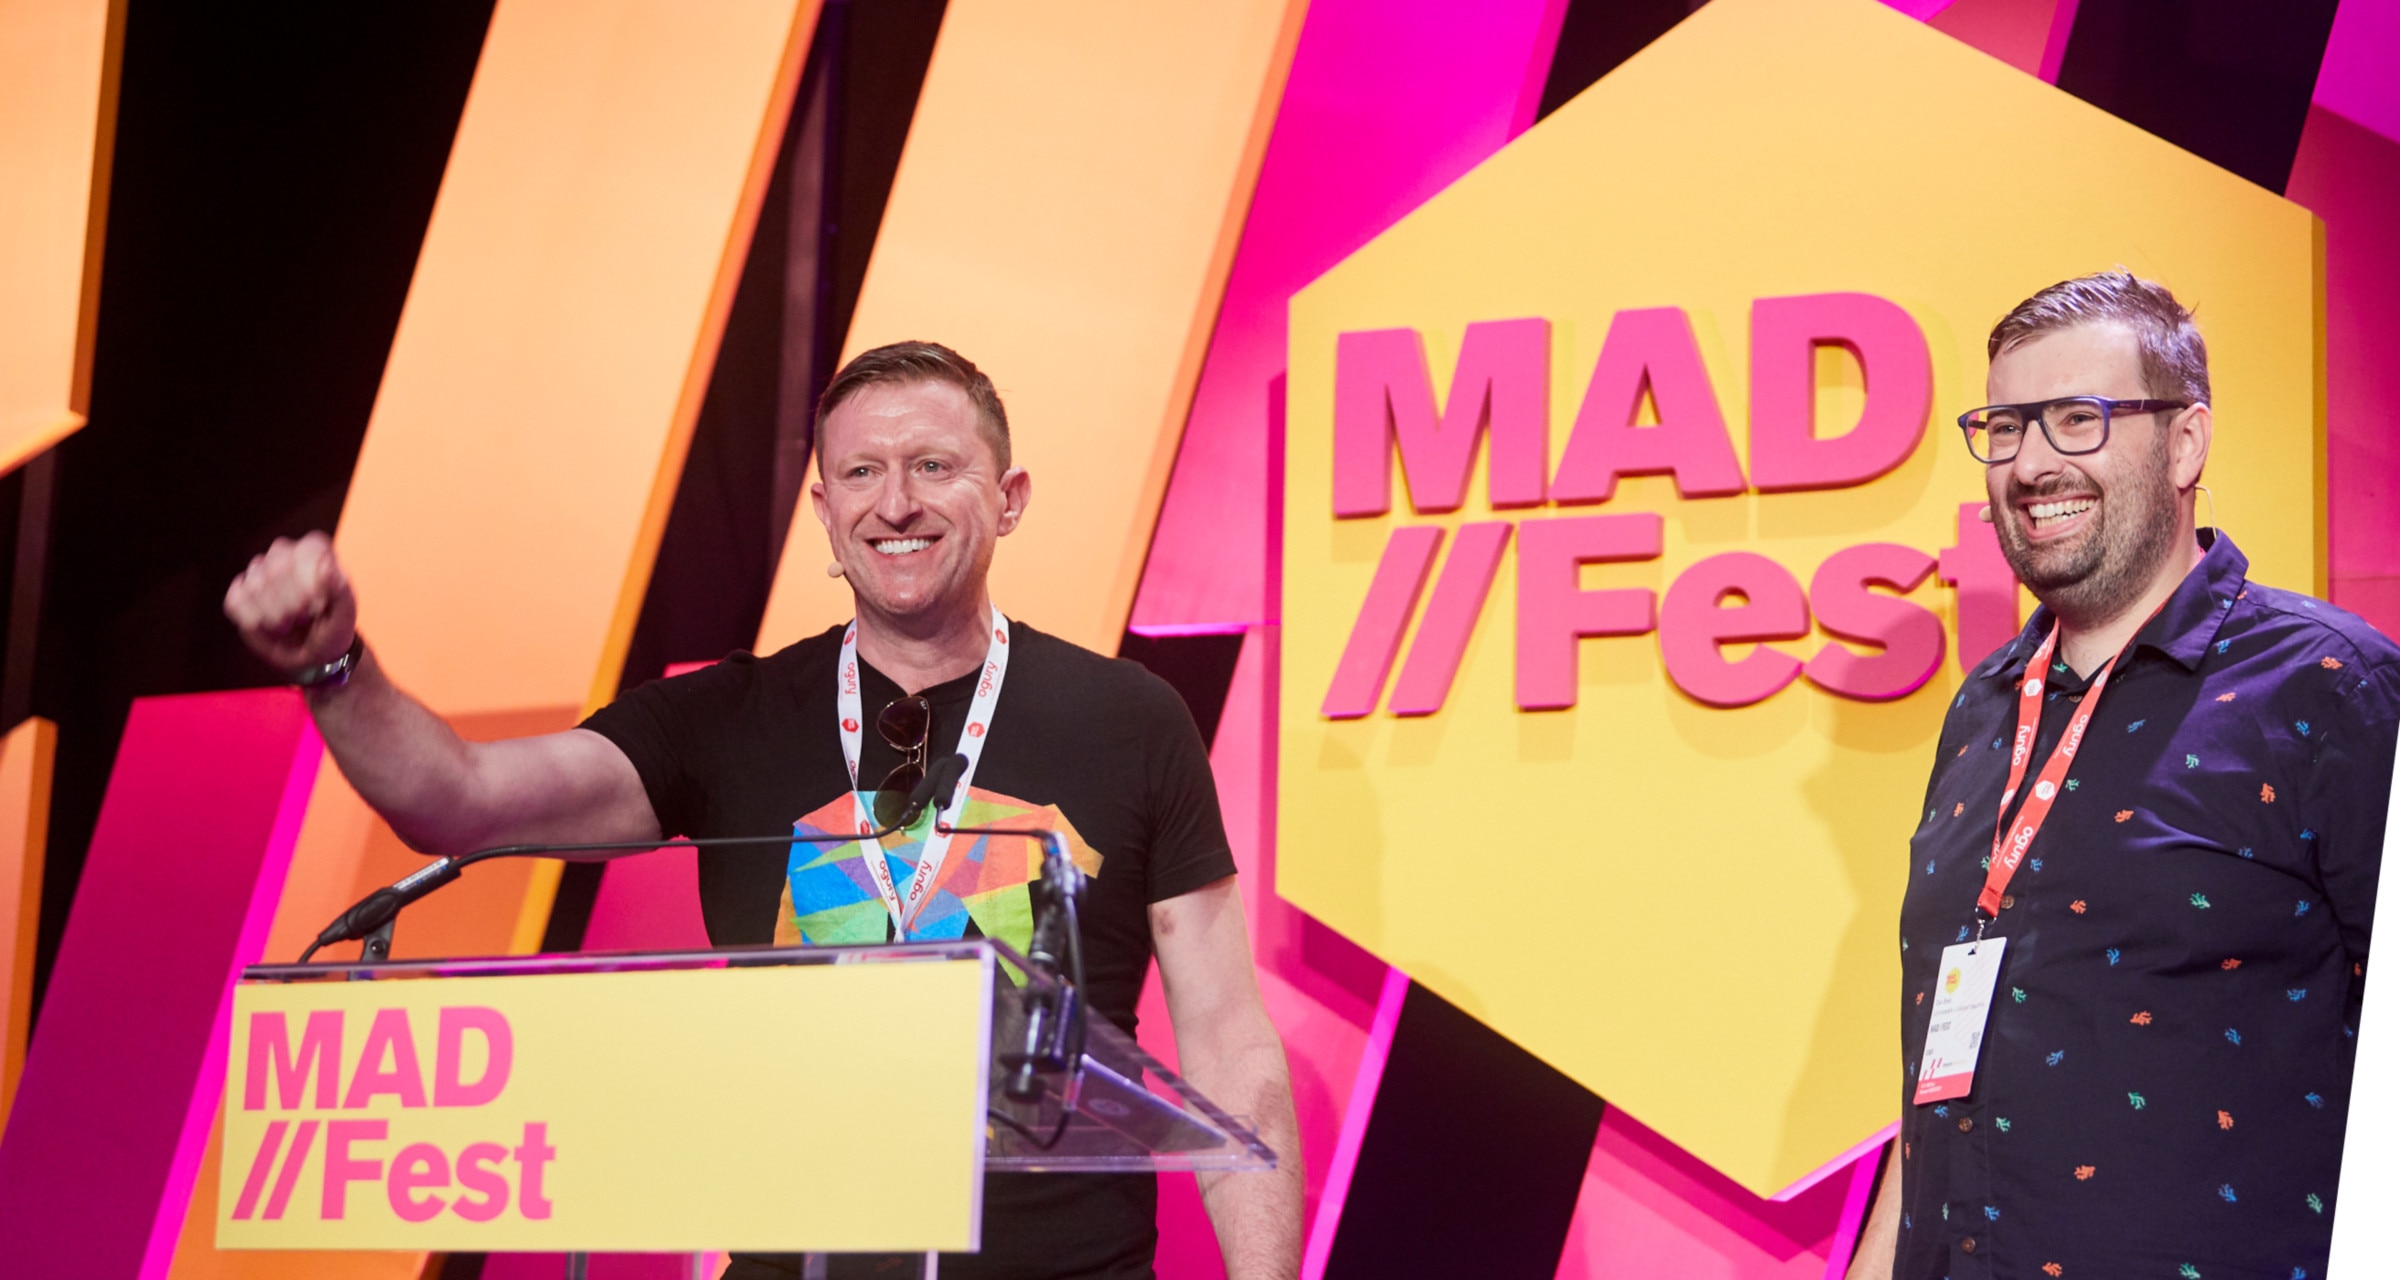 MAD//Fest founders Dan Brain and Ian Houghton smile onstage at a MAD//Fest event. The decor is bright pink, yellow, and orange.